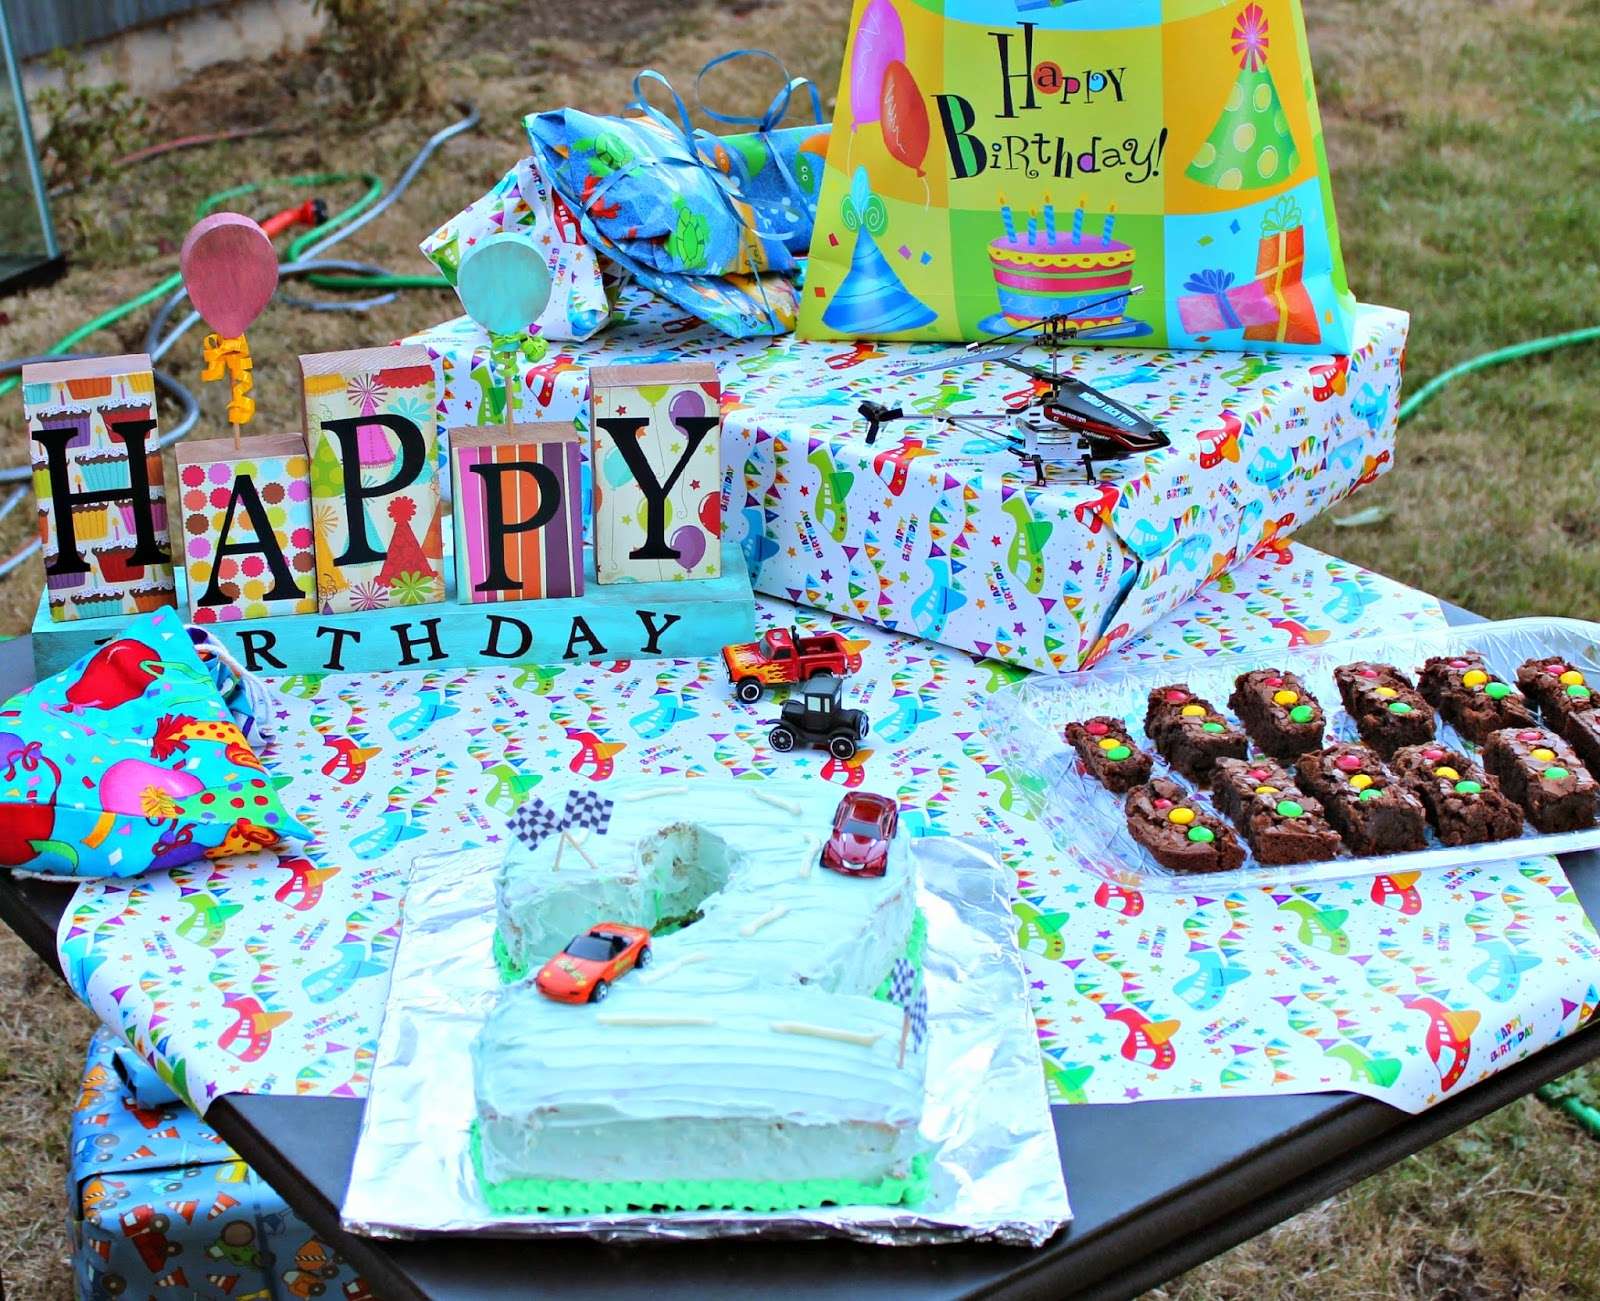 Potpourri Mommy: Things that Go Birthday Party